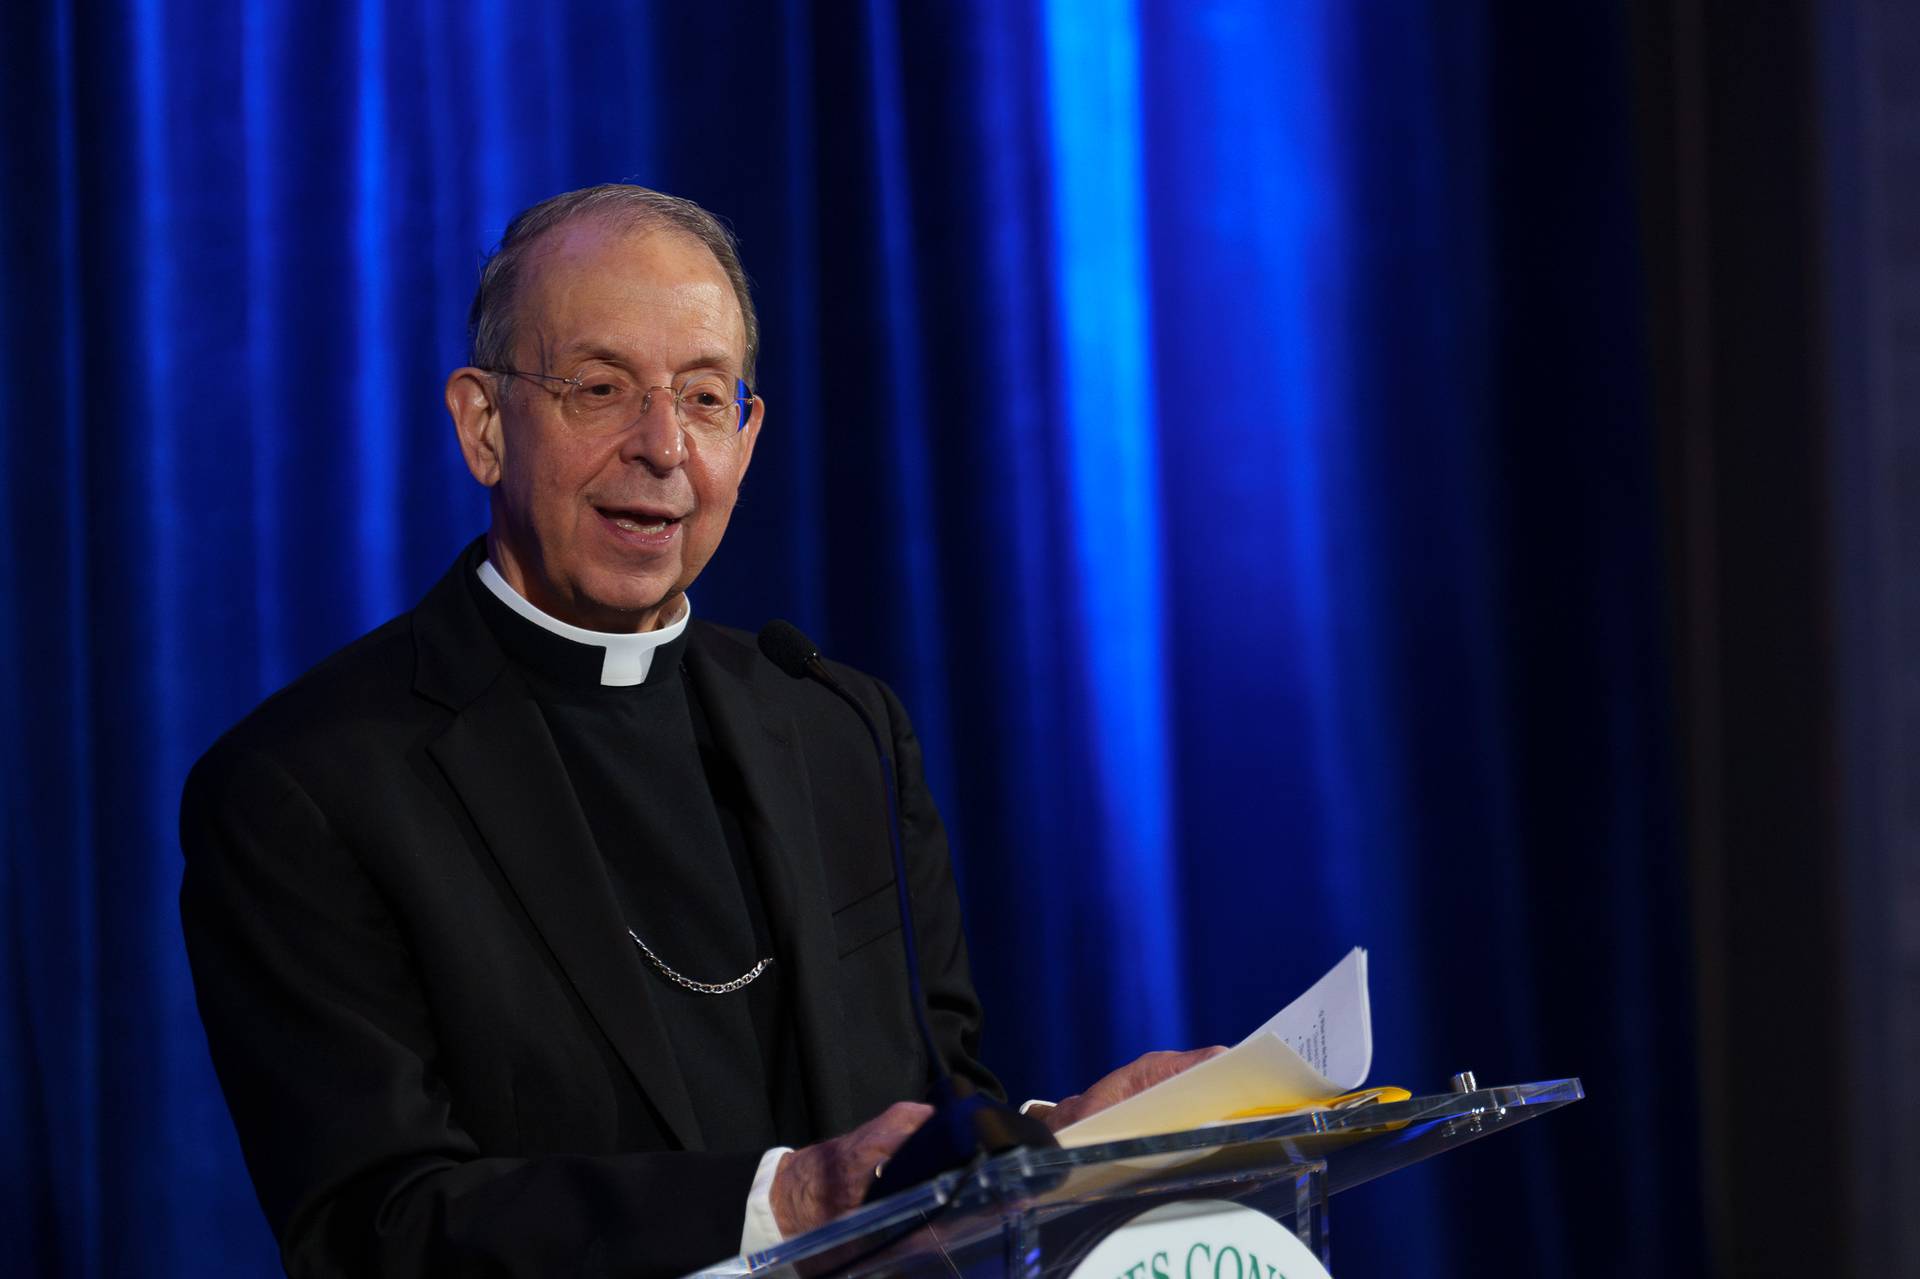 Archbishop William Lori of Baltimore presenting the supplemental materials to the U.S. Bishops voting guide for Catholics at the the third day of their general assembly on Nov. 15. (Credit: USCCB.)